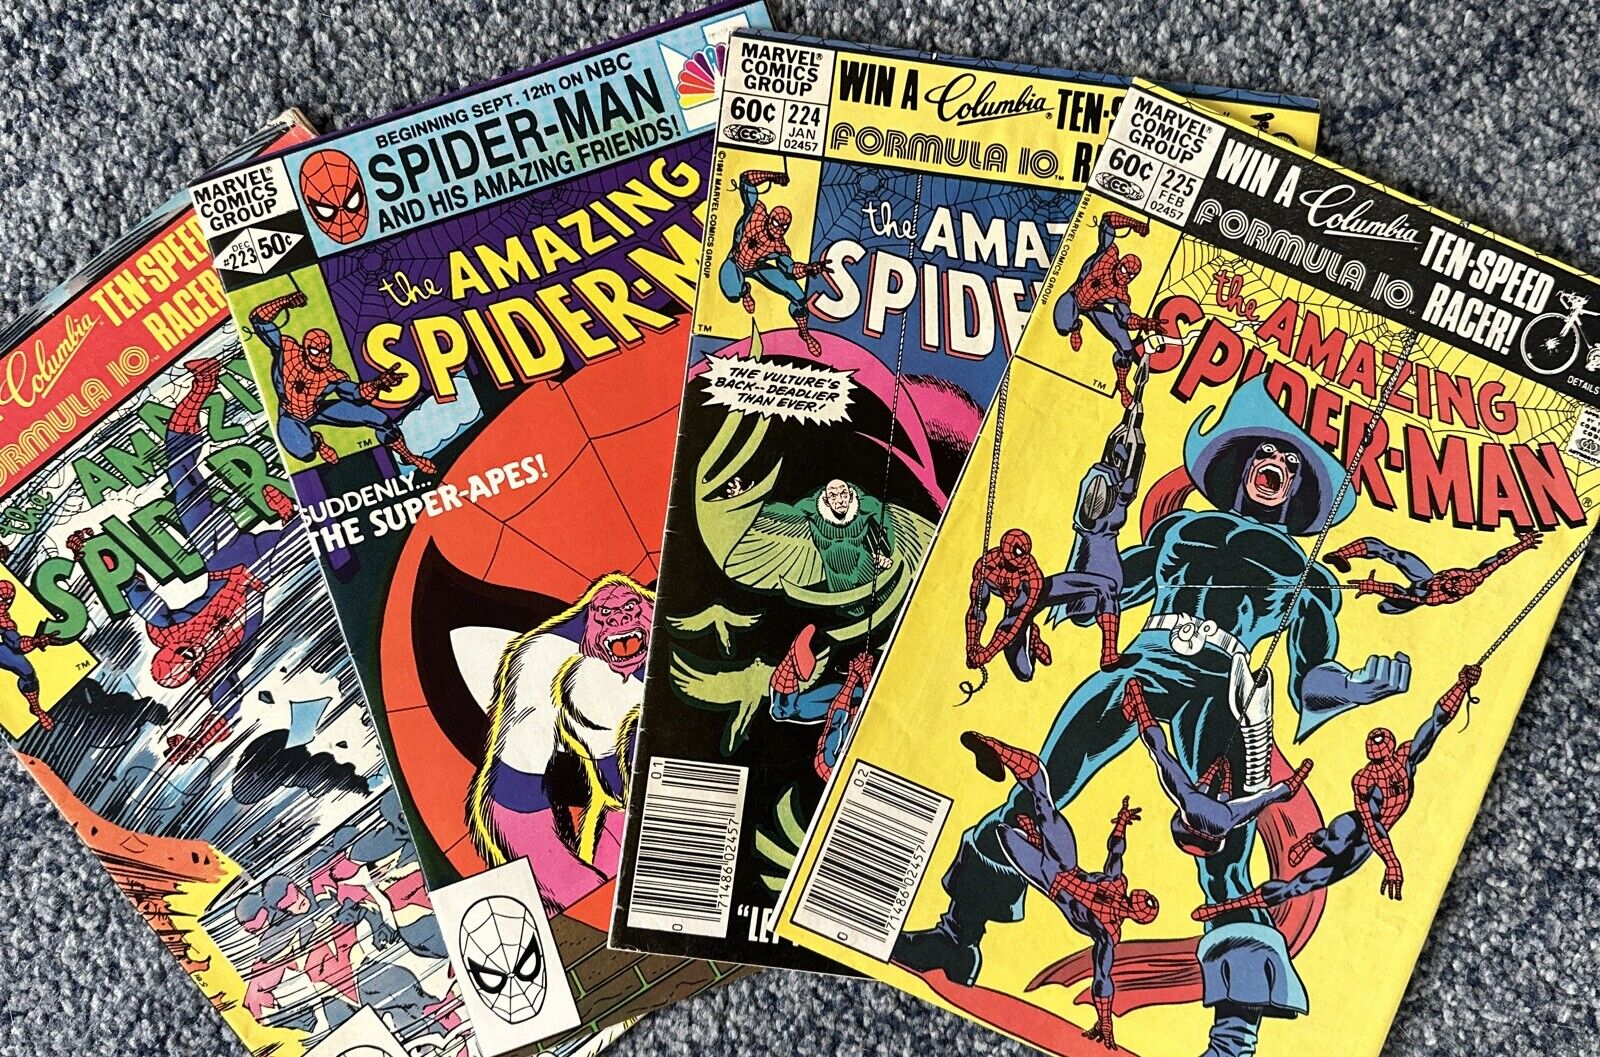 LOT 4 issues - Amazing Spider-Man #222 + 223 + 224 + 225